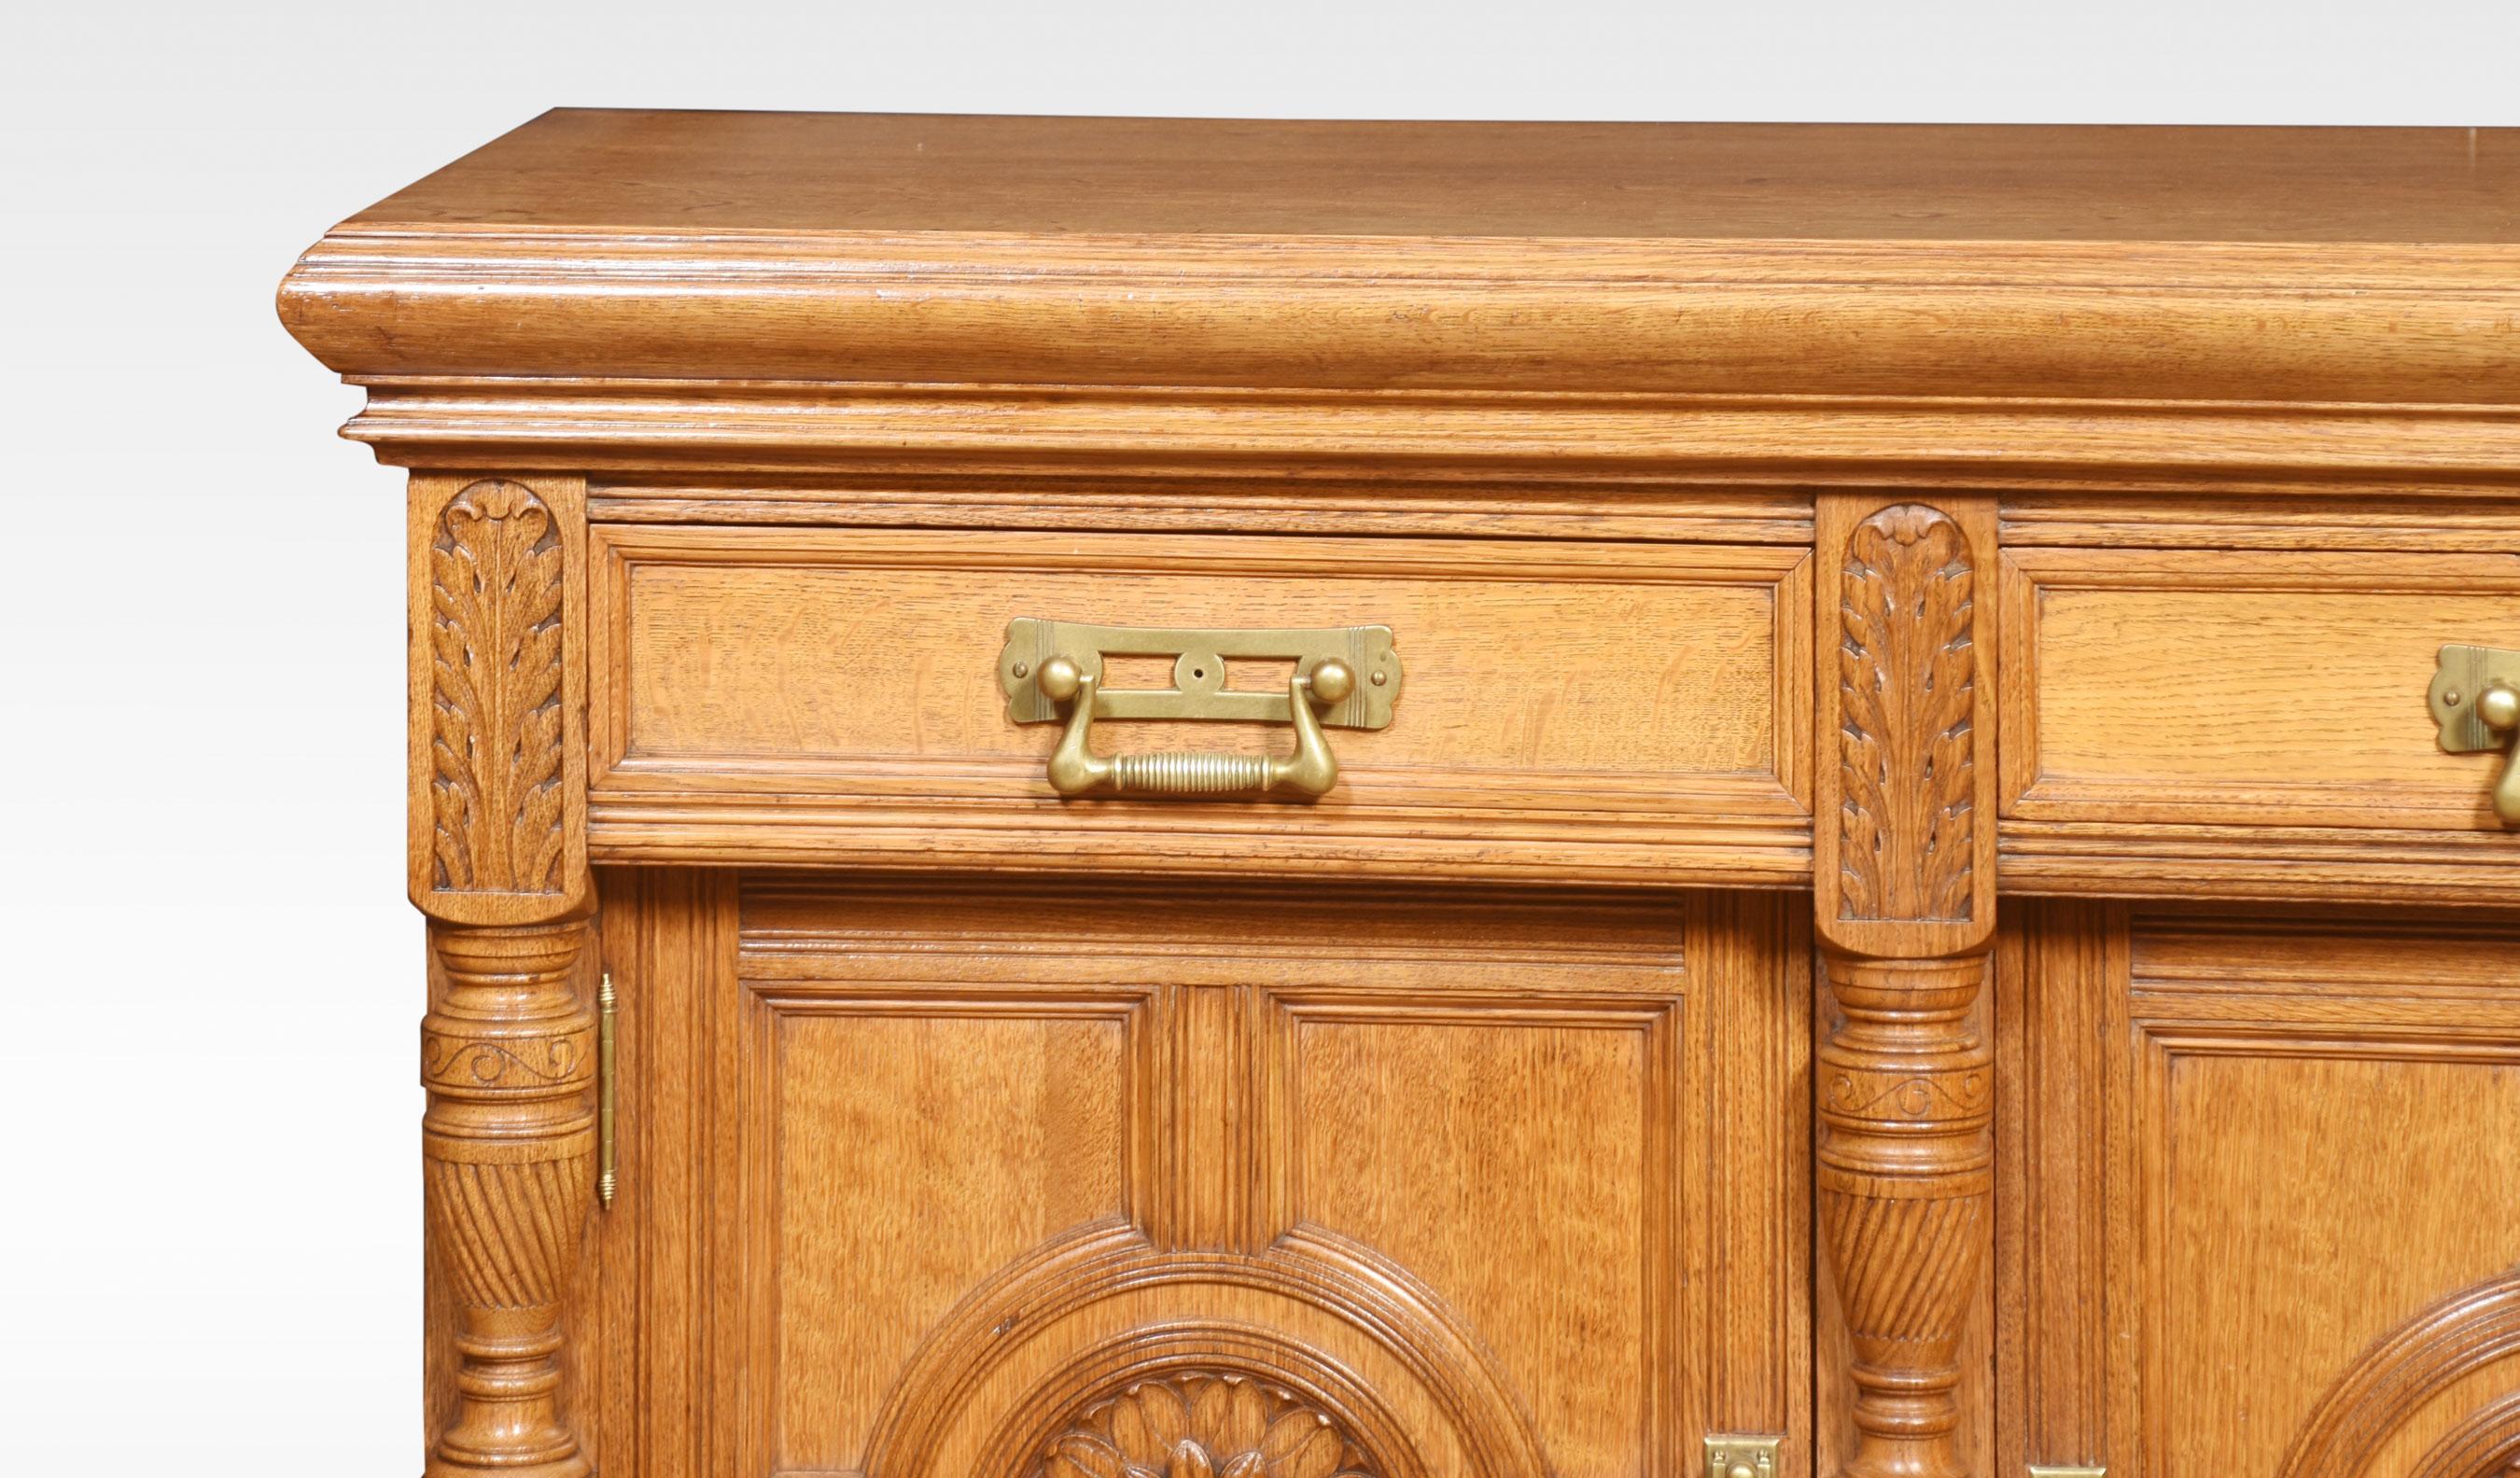 19th-century oak sideboard, the large rectangular top with moulded edge above two freeze drawers fitted with bold brass handles. The base section is fitted with a pair of panelled doors with circular moulded centres with floral carved decoration.